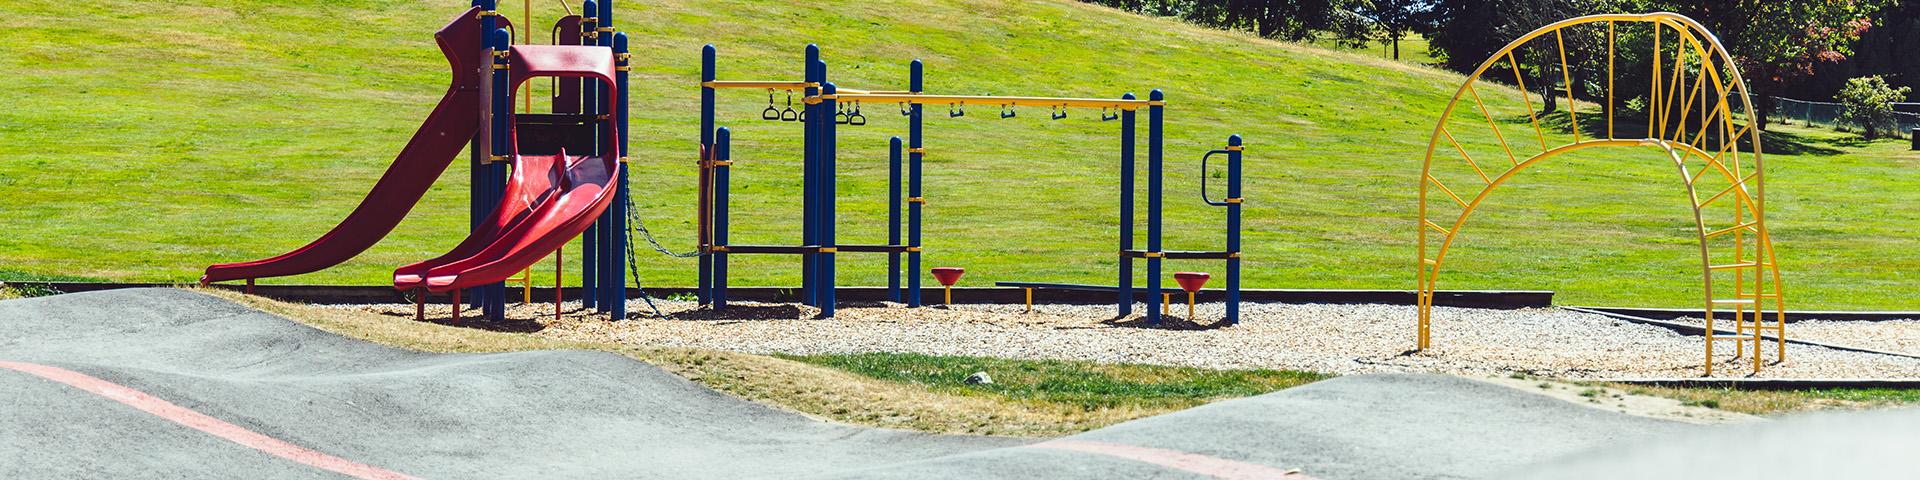 Playground in background and glimpses 